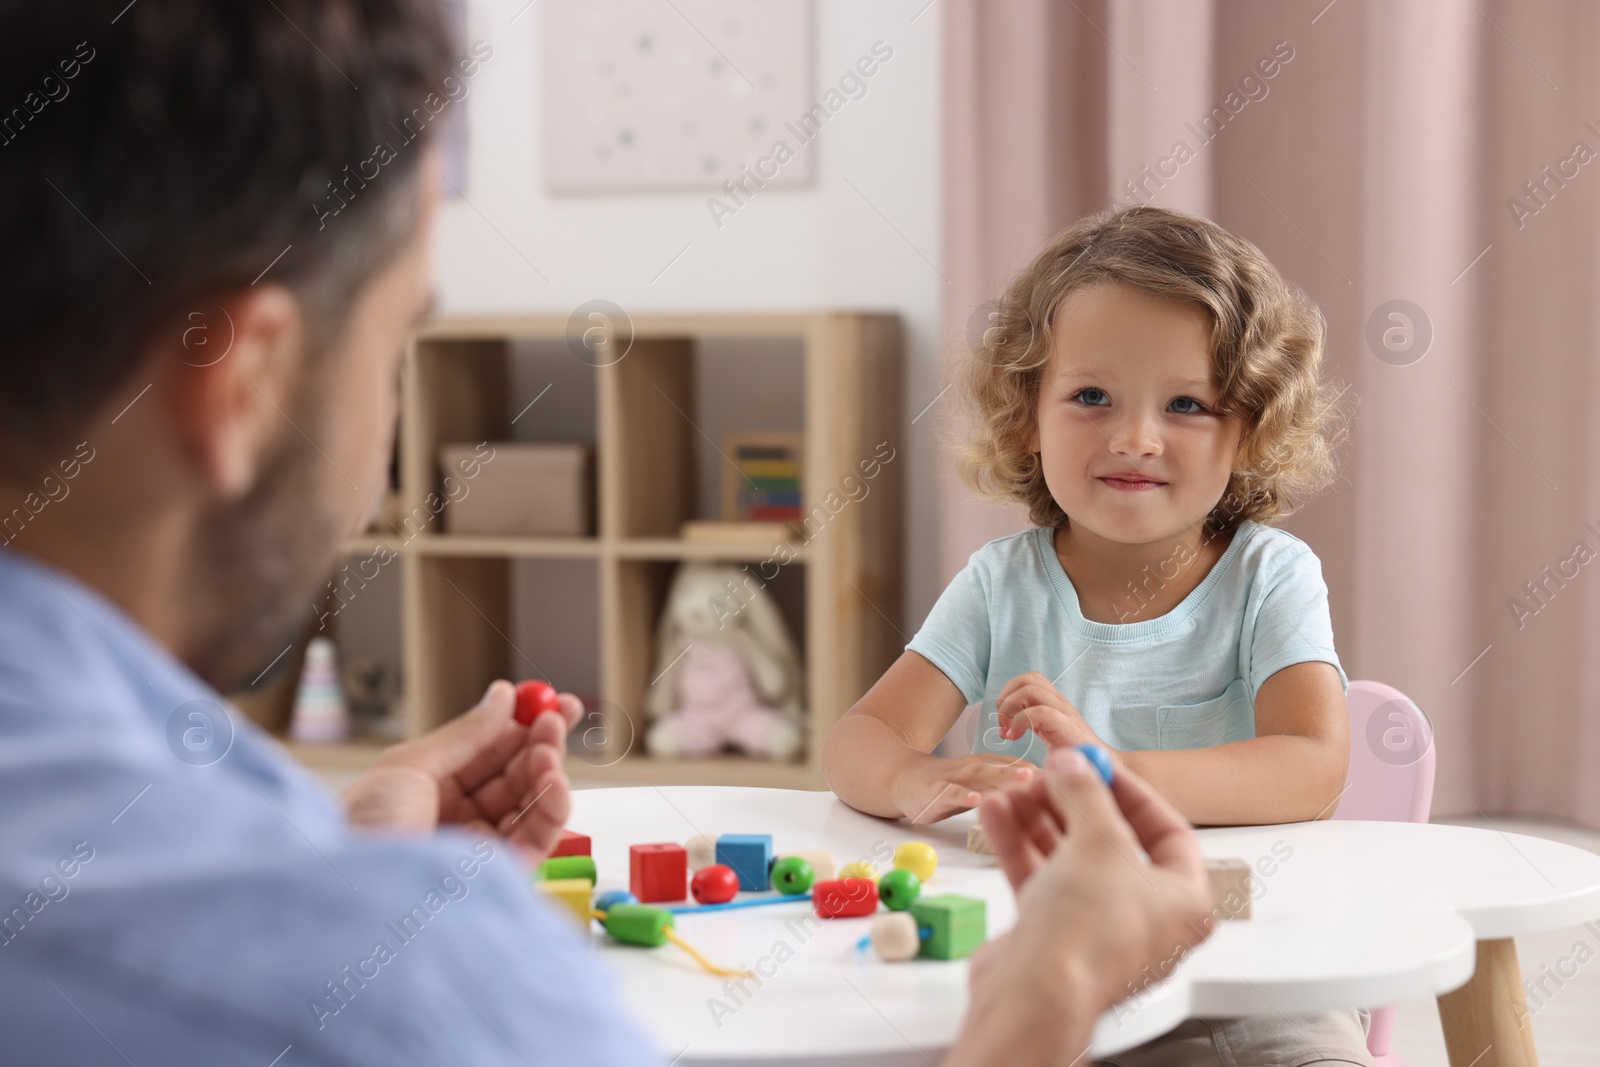 Photo of Motor skills development. Father and daughter playing with wooden lacing toy at table indoors